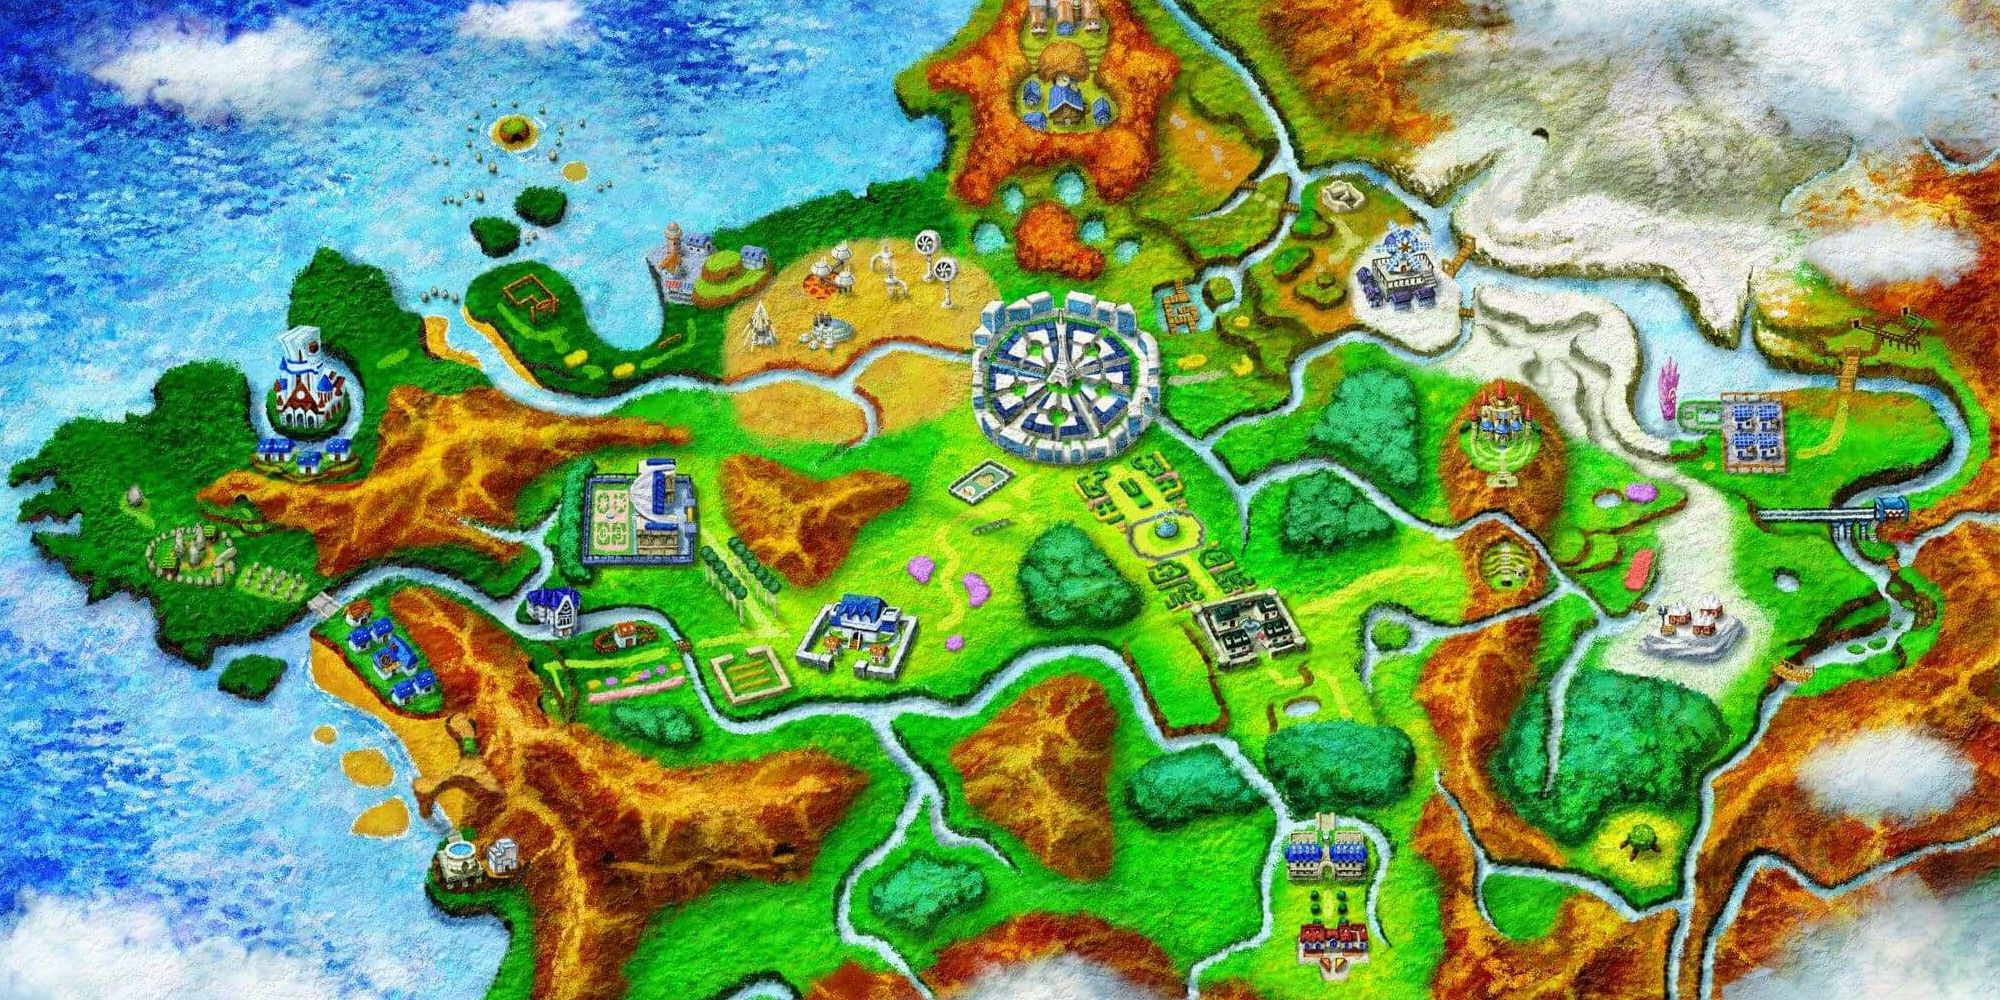 A map of Pokemon X and Y's region, Kalos.